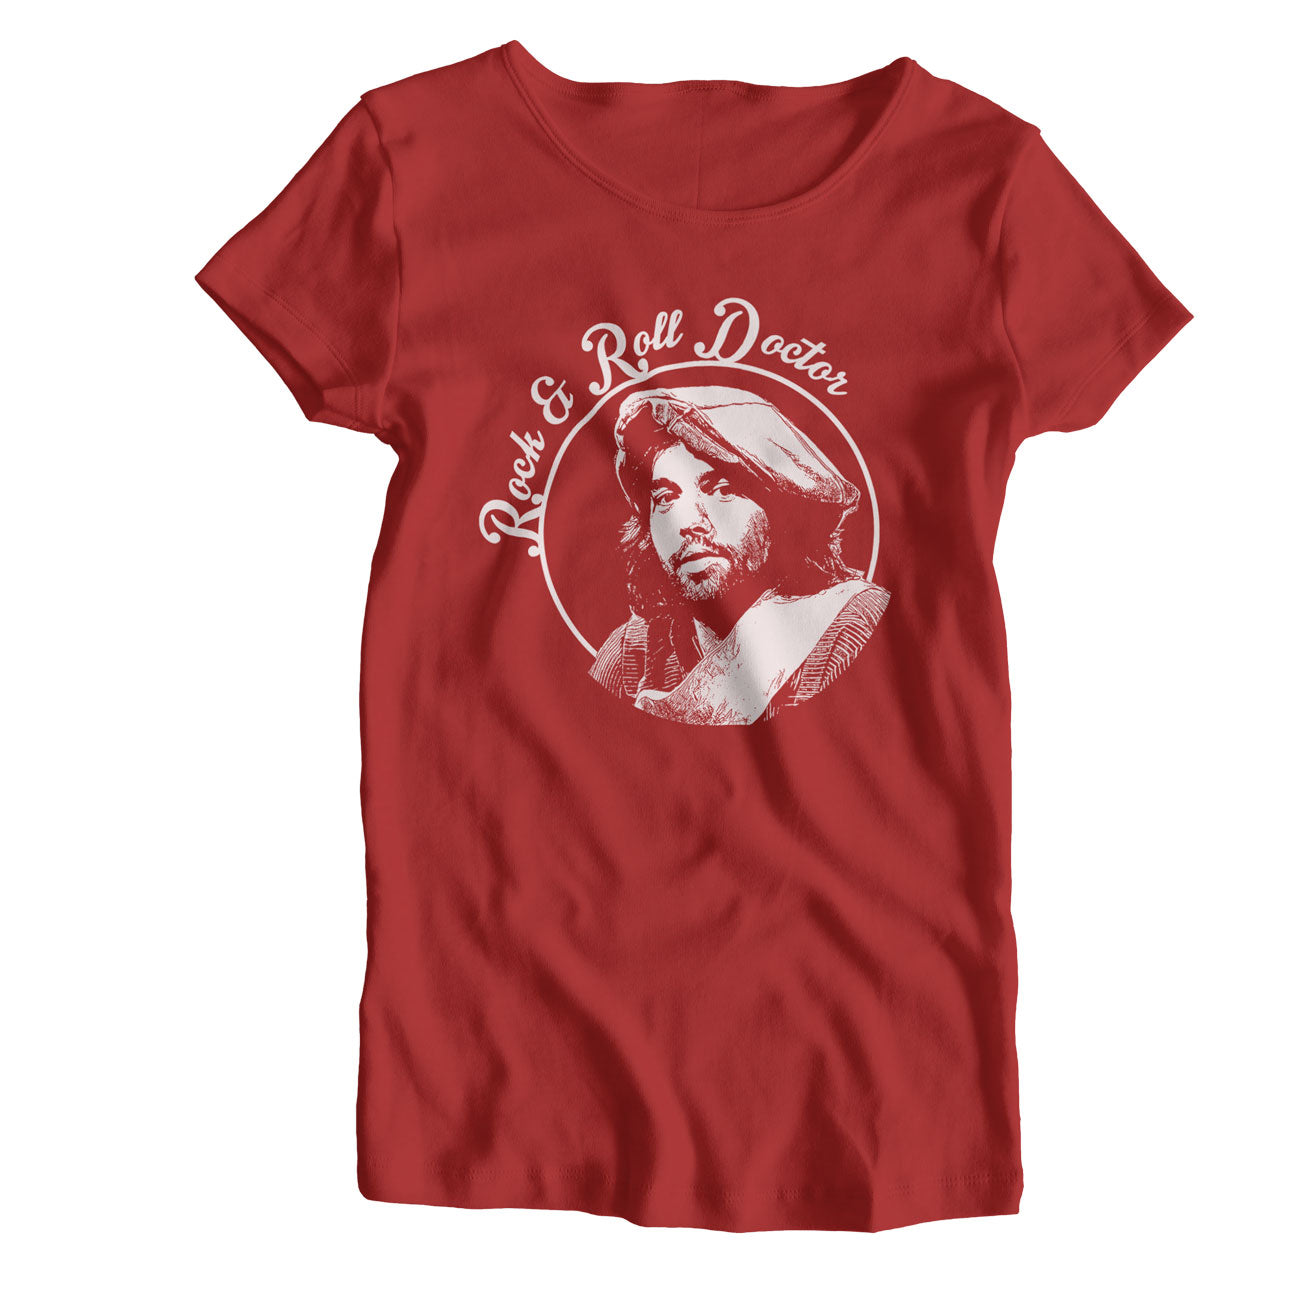 Inspired by Little Feat T Shirt - Lowell George Rock & Roll Doctor